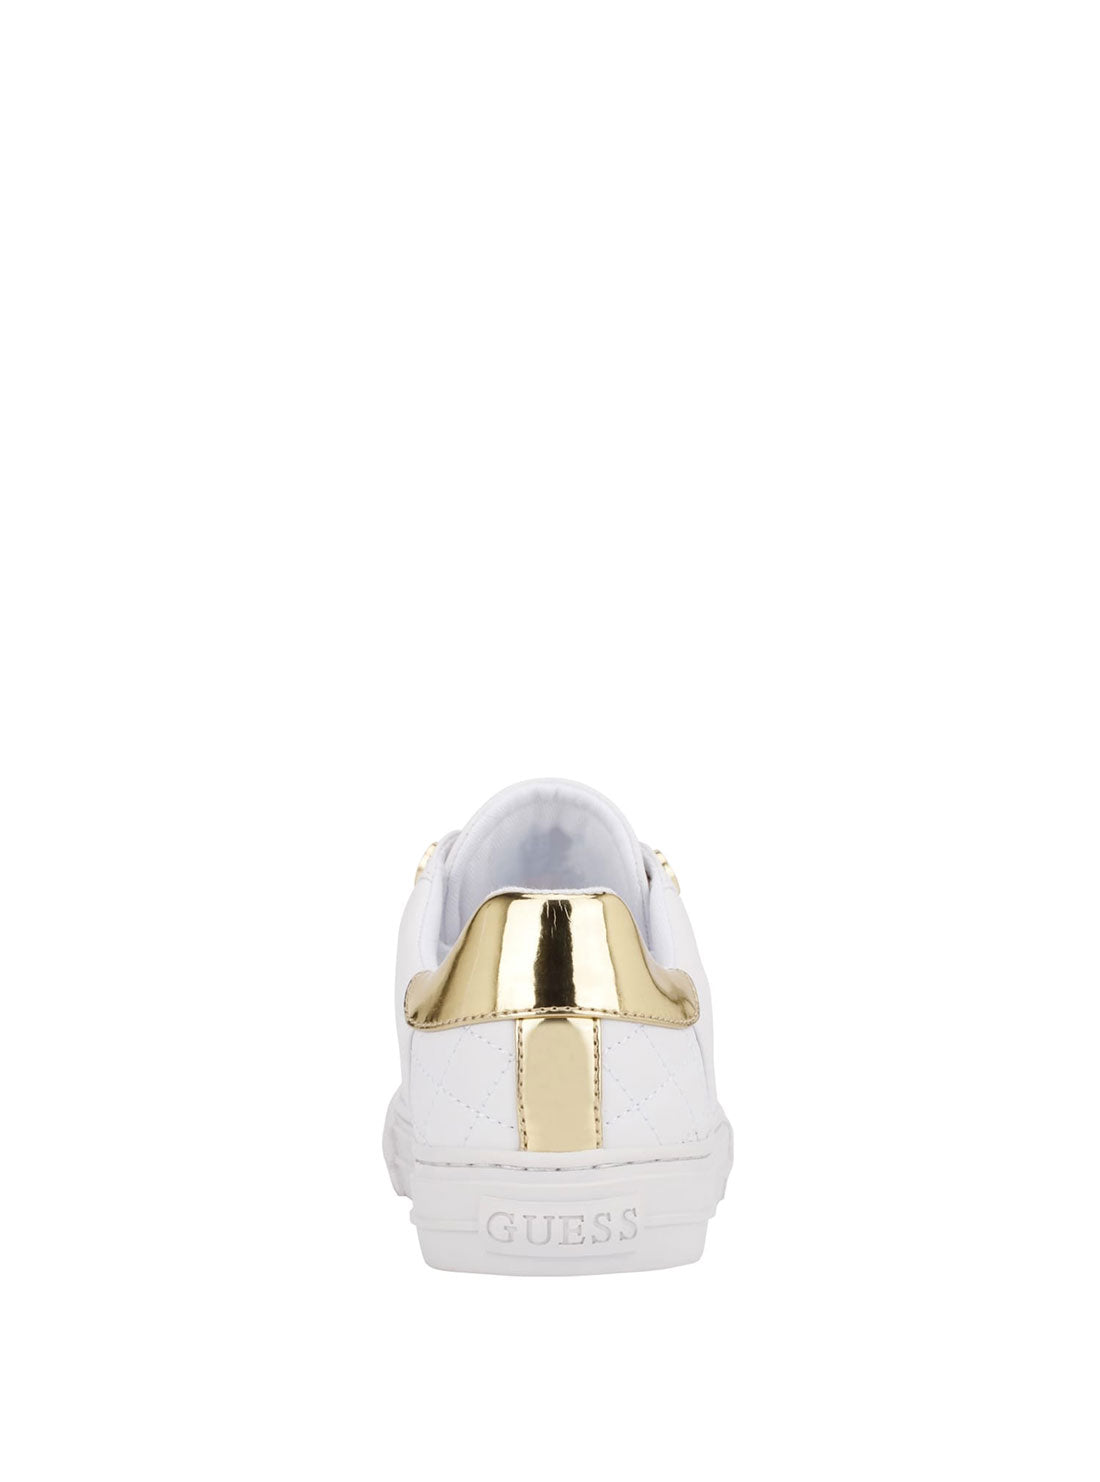 GUESS White Gold Loven Low-Top Sneakers back view